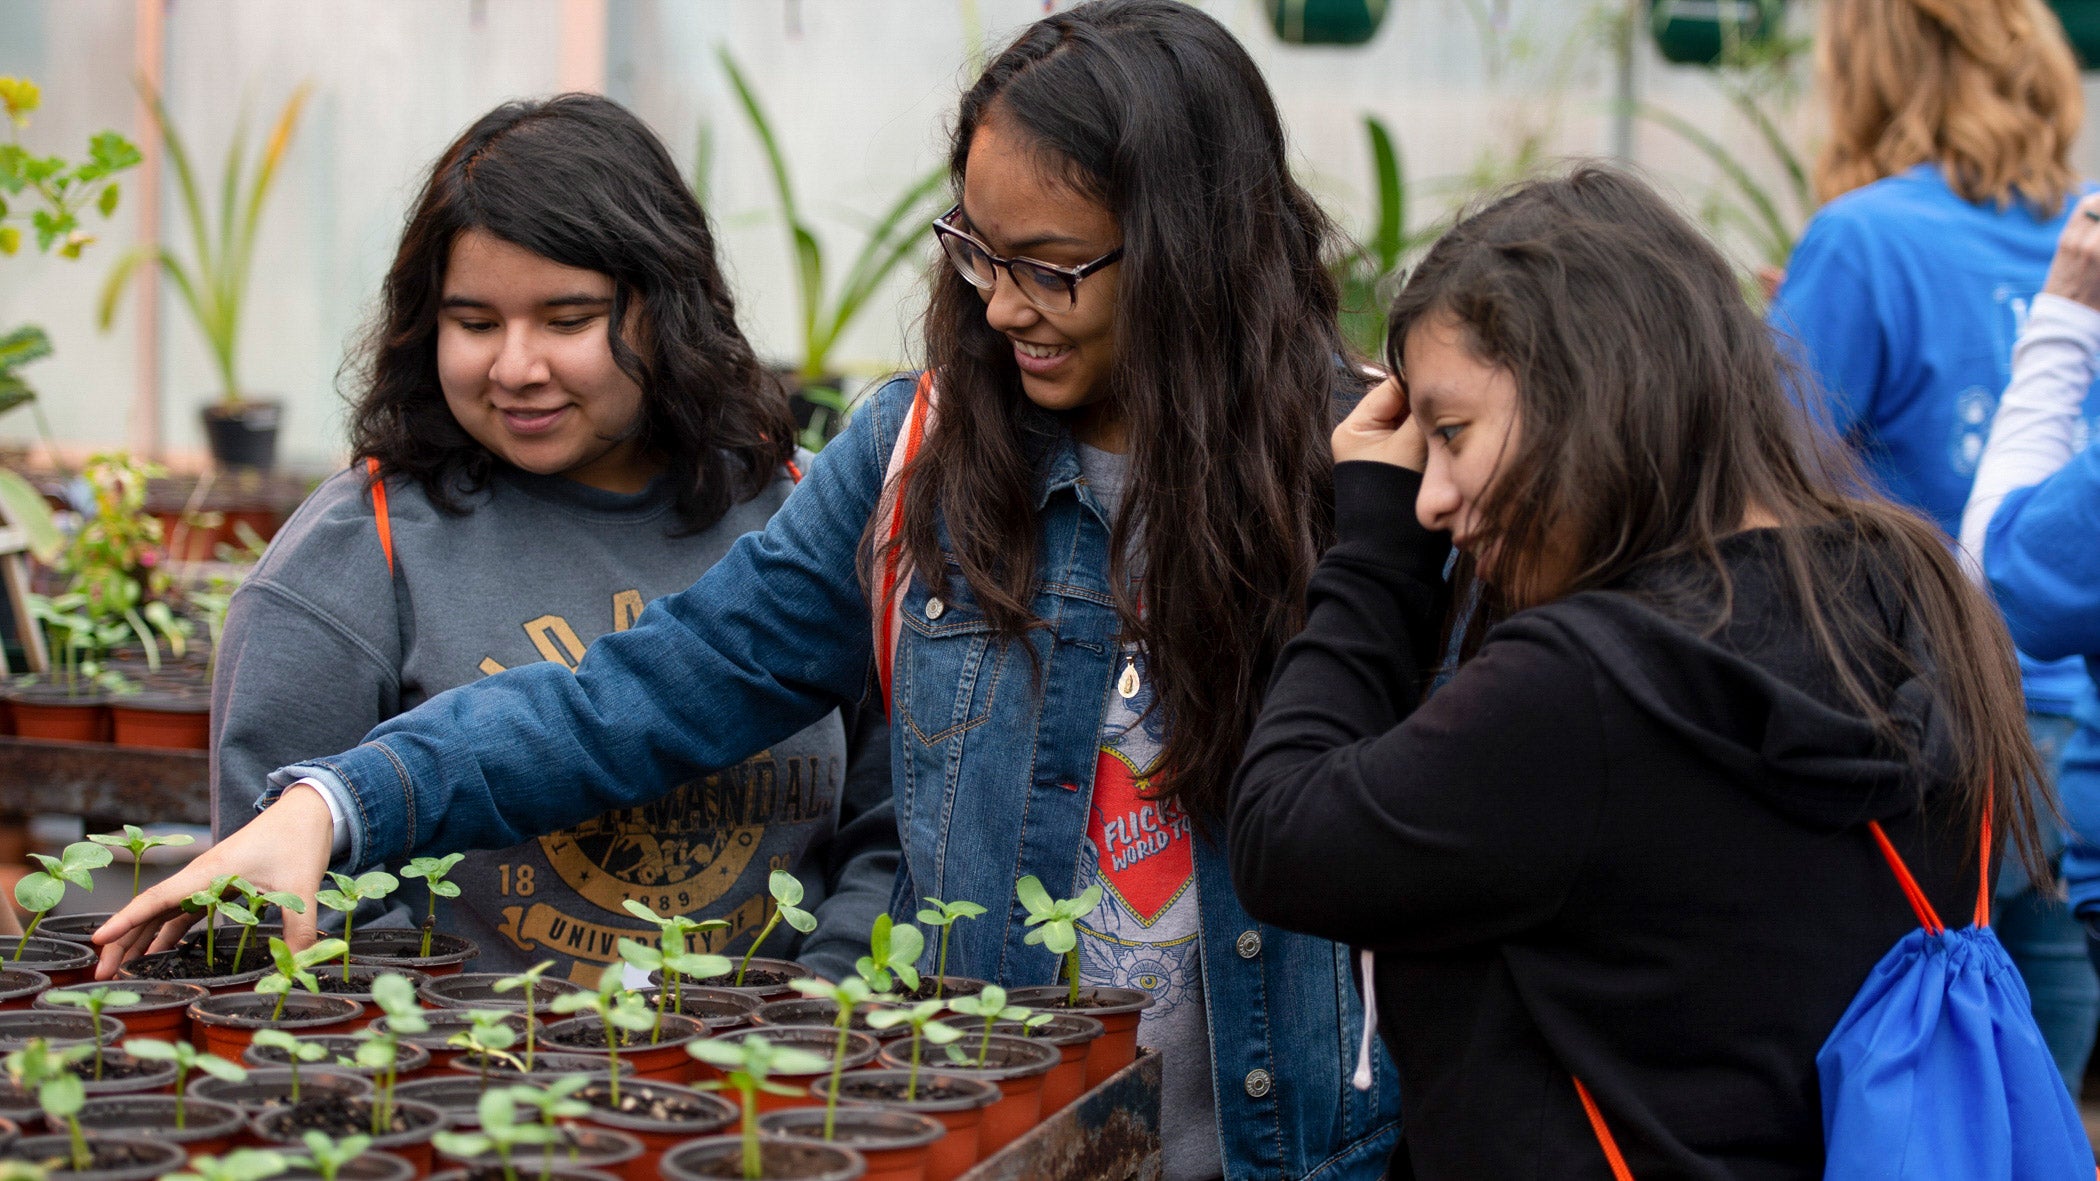 Students in the greenhouse with plants